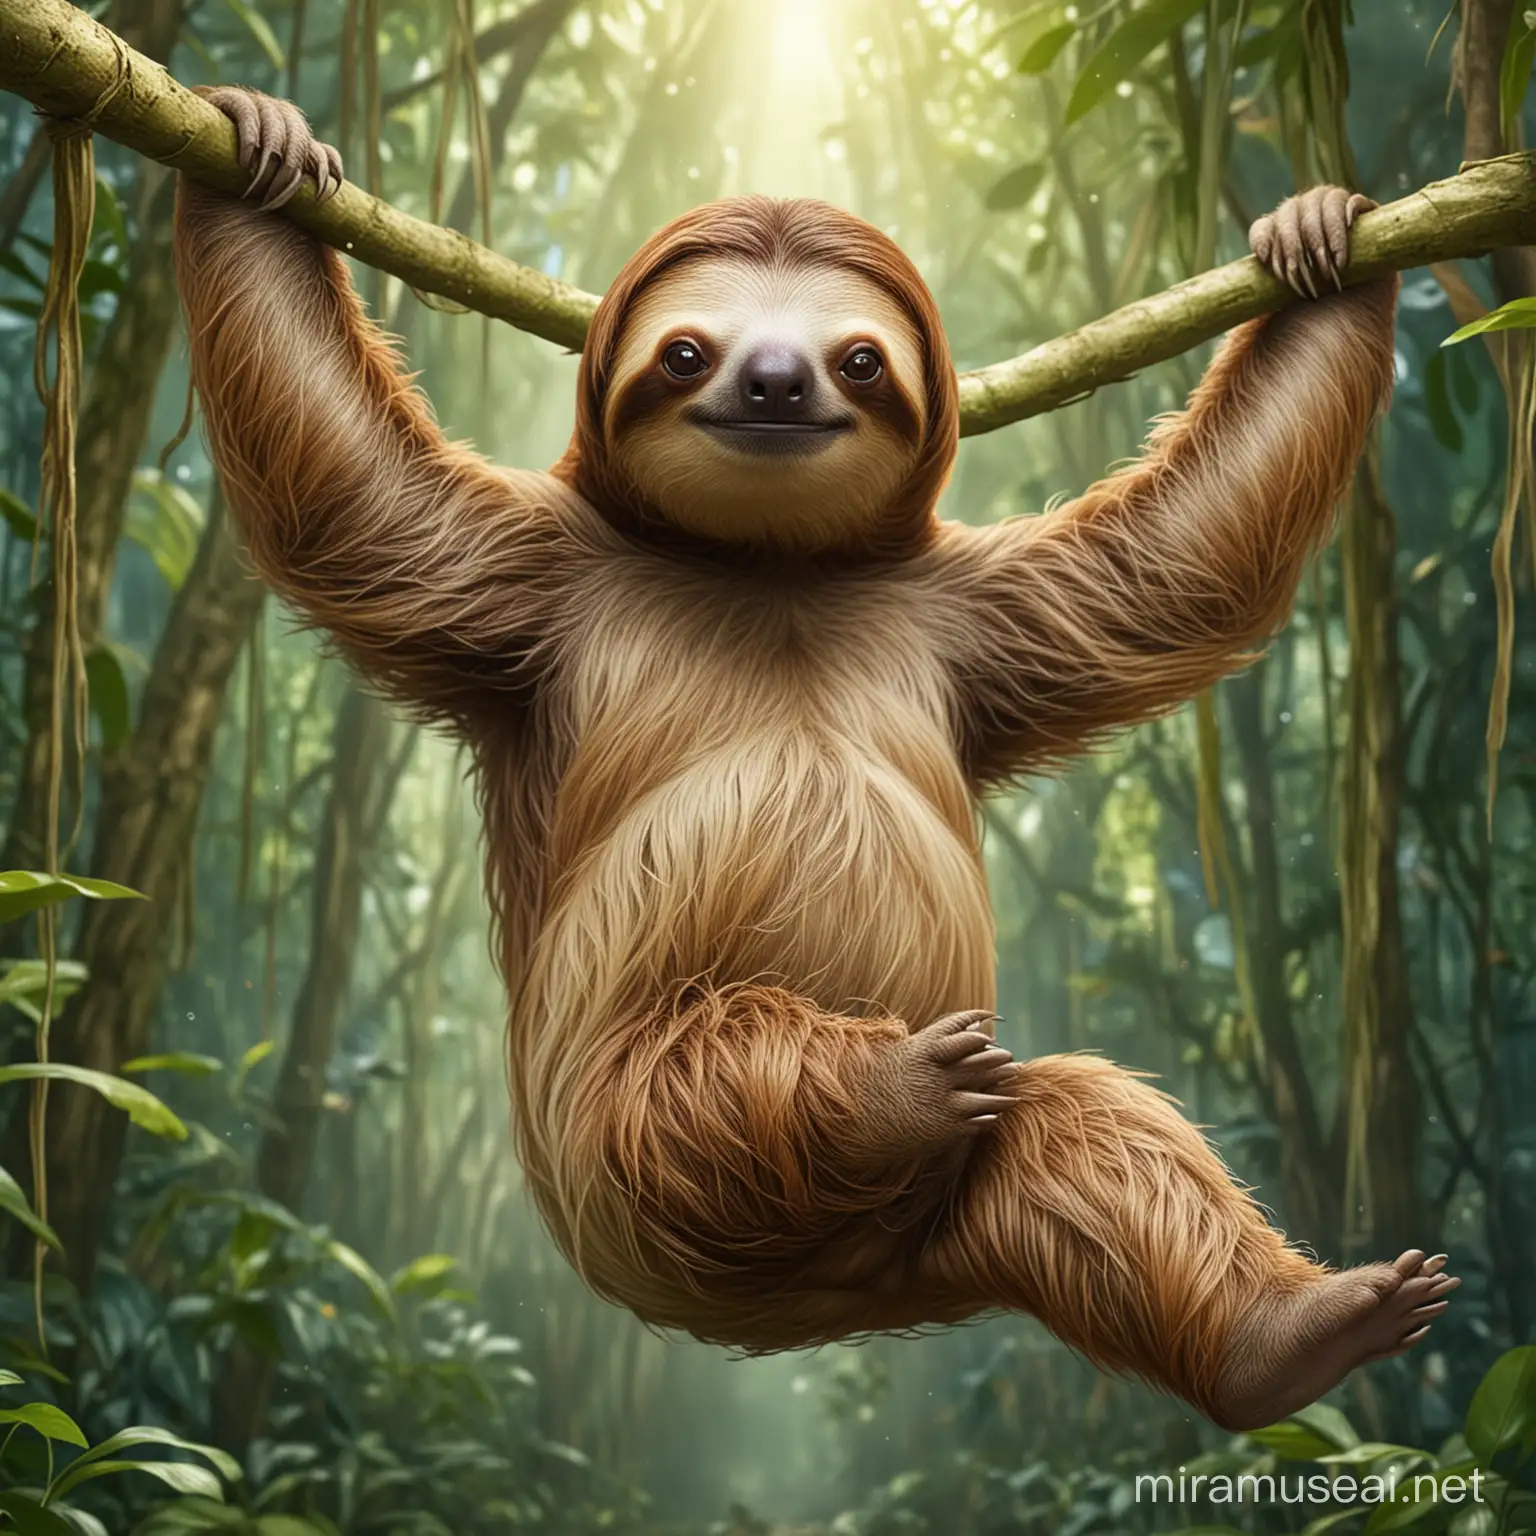 Imagine a human being in the form of a sloth